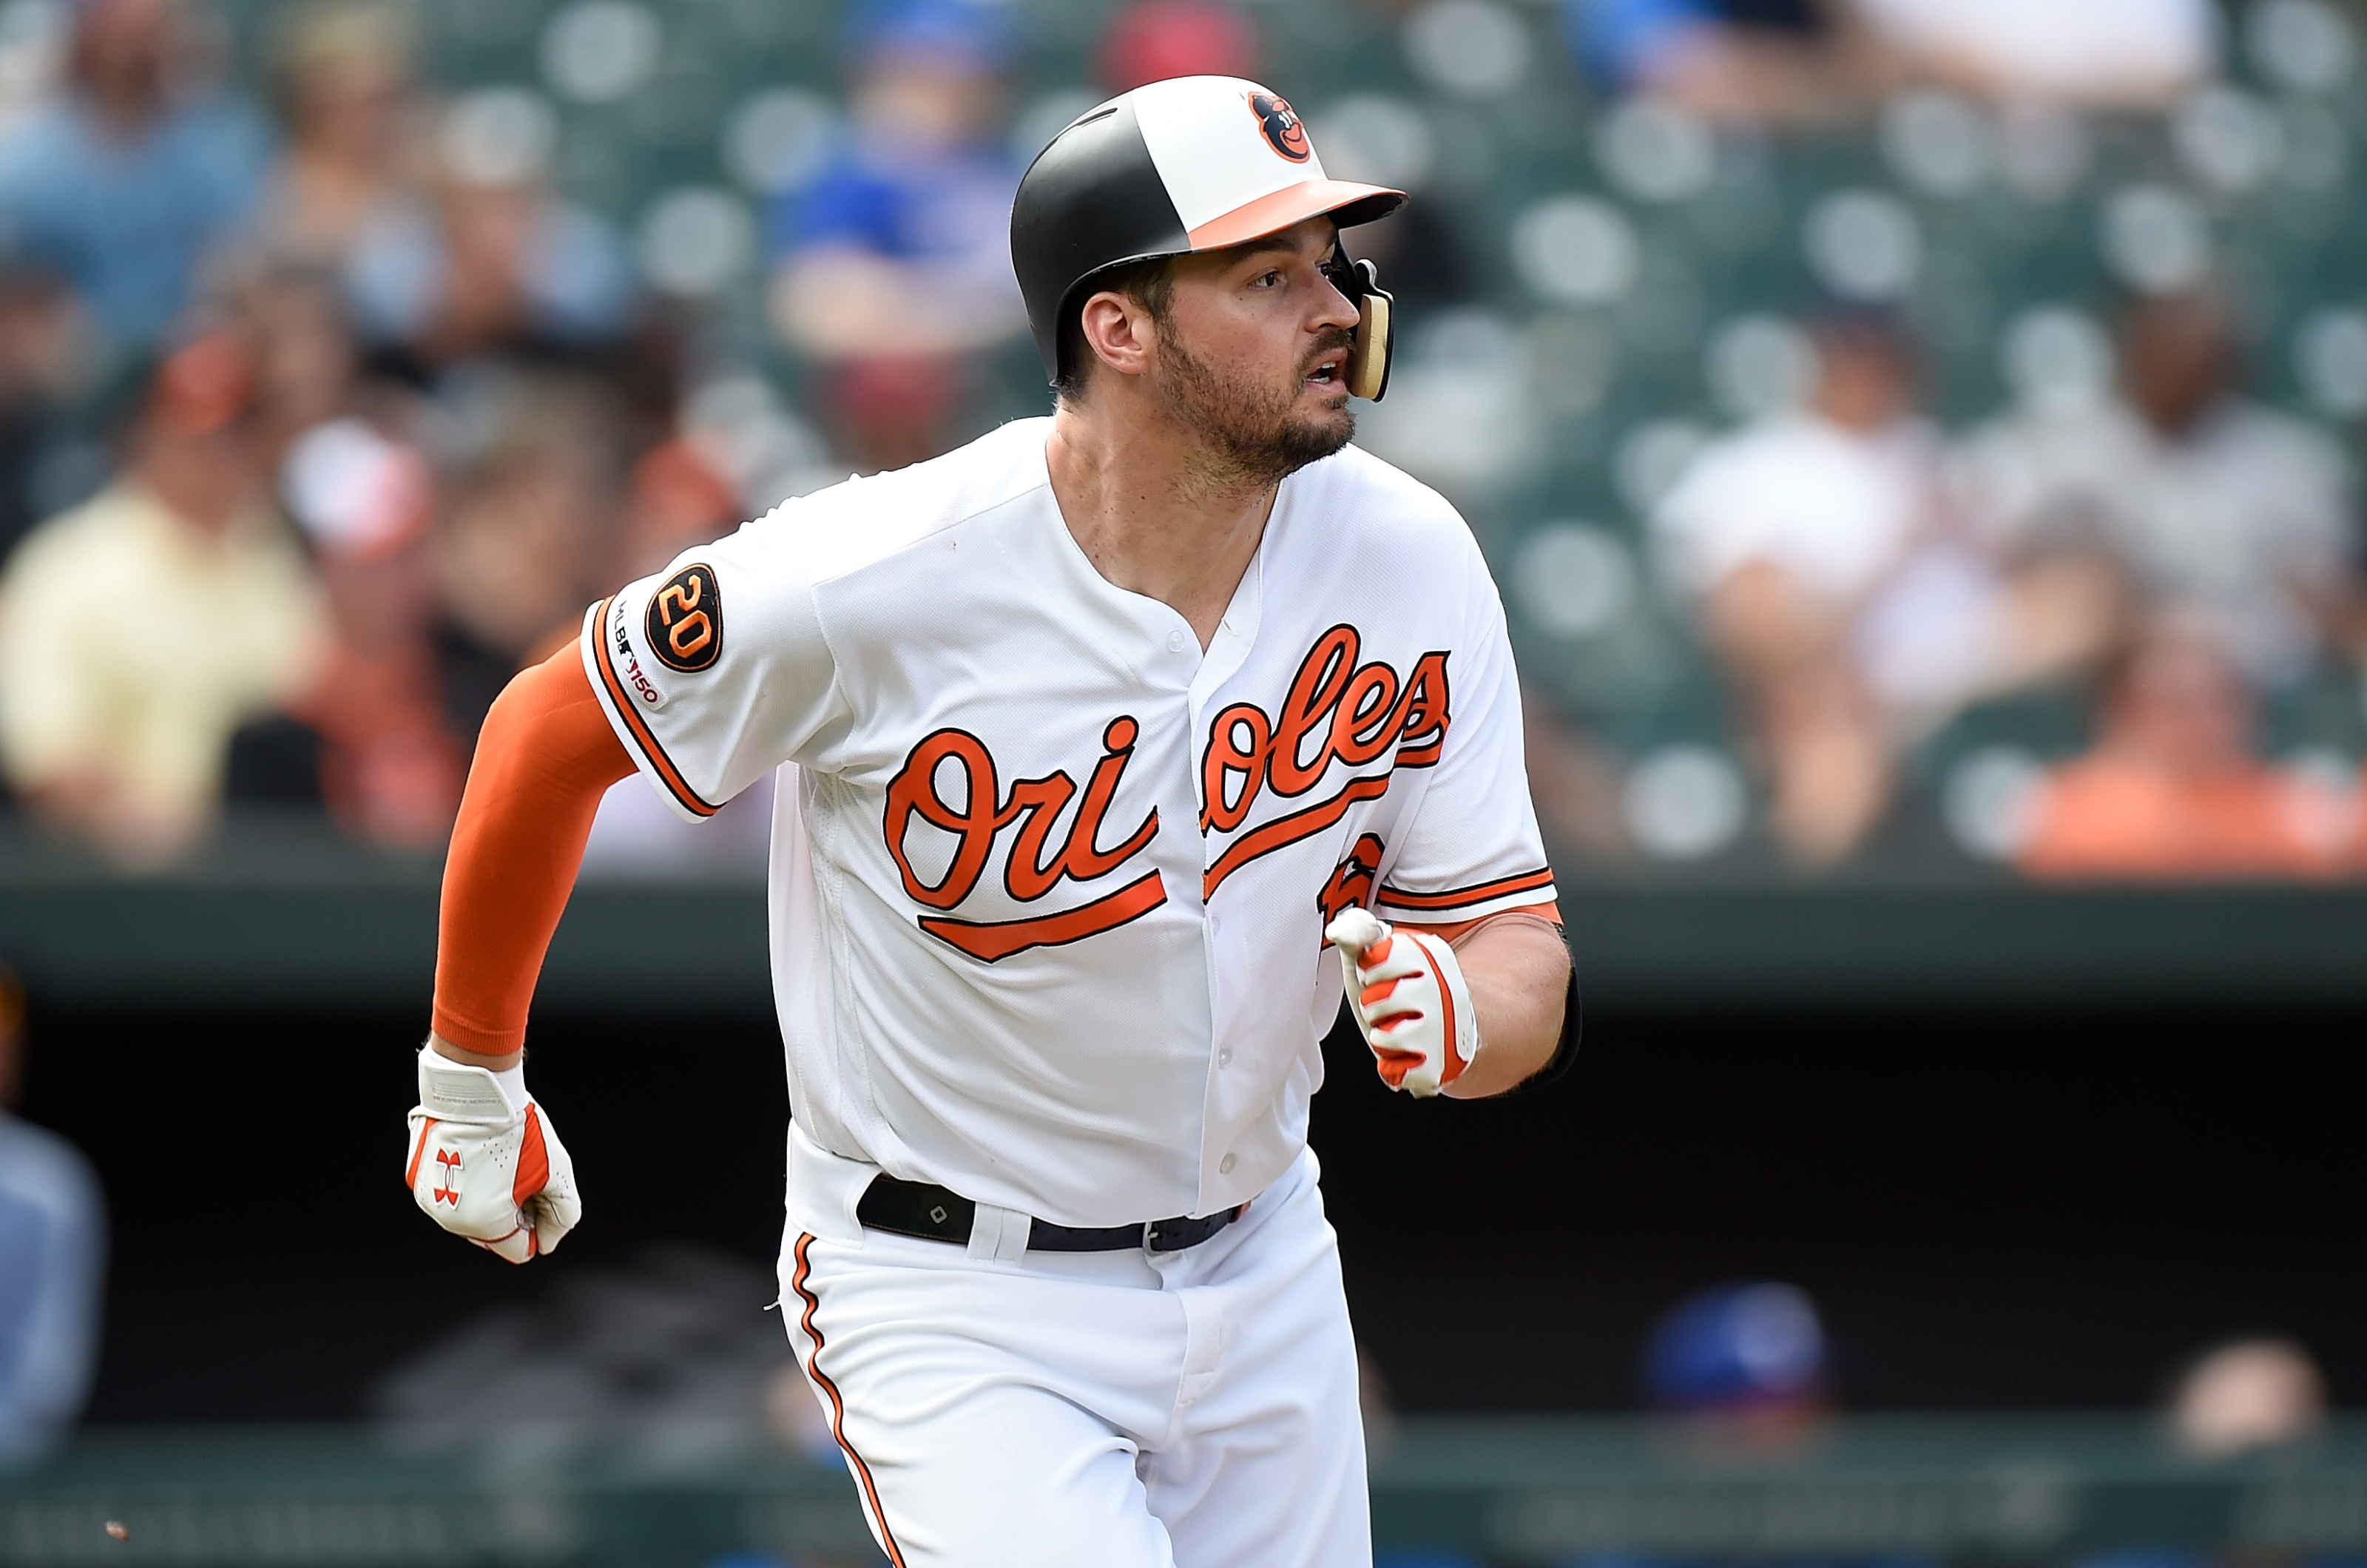 Baltimore Orioles: Trey Mancini is back to batting practice